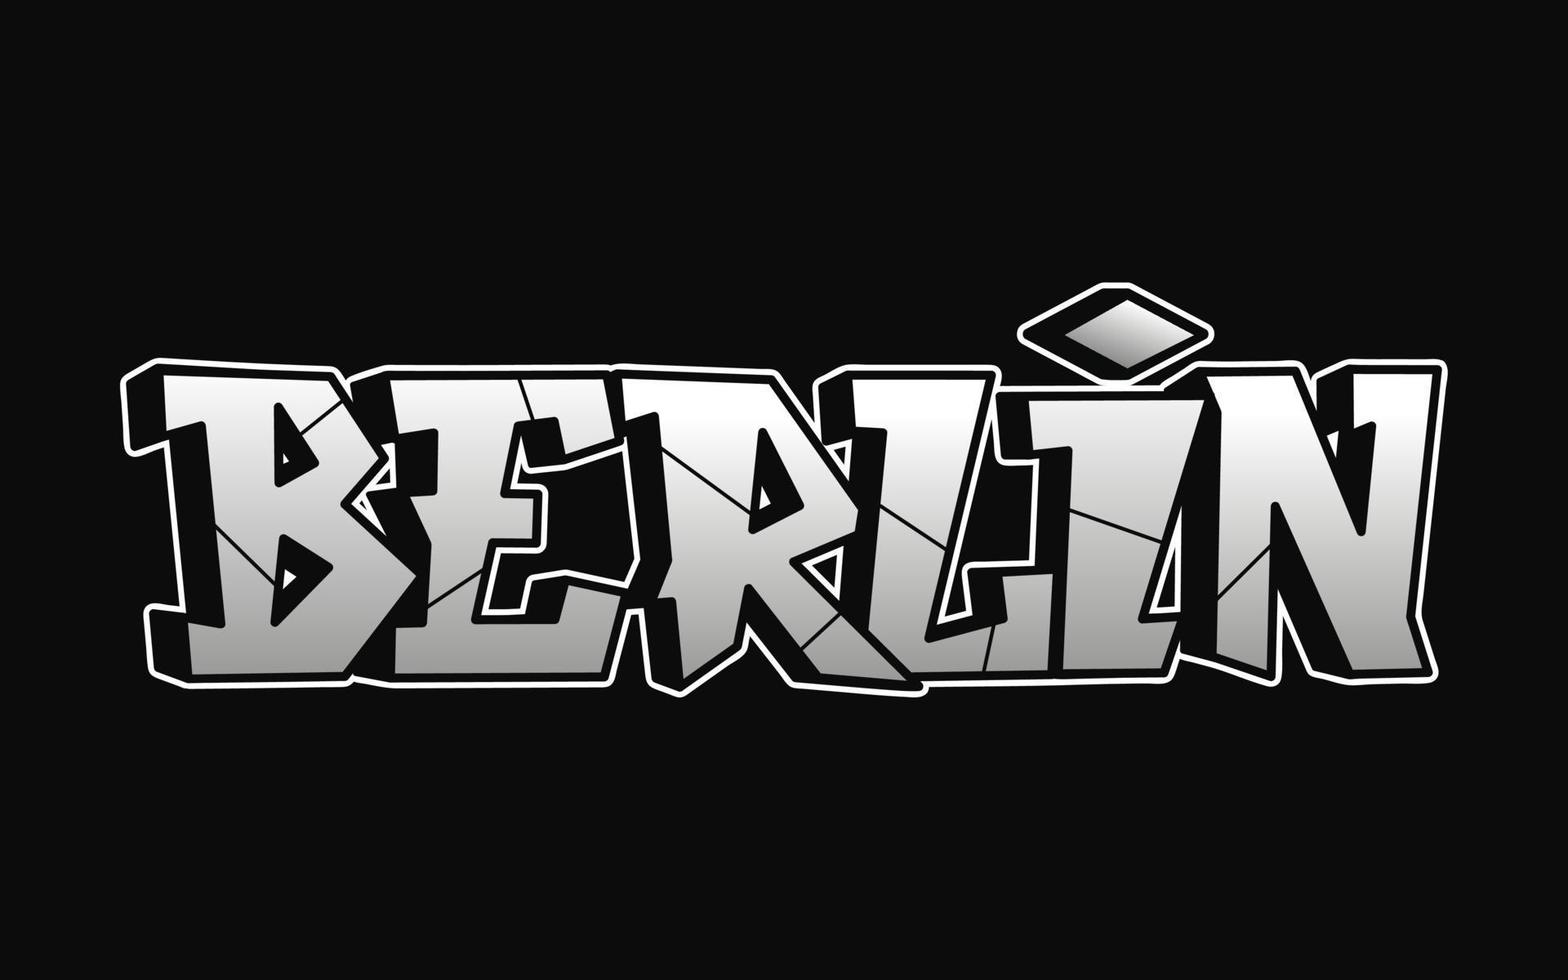 Berlin - single word, letters graffiti style. Vector hand drawn logo. Funny cool trippy word Berlin, fashion, graffiti style print t-shirt, poster concept